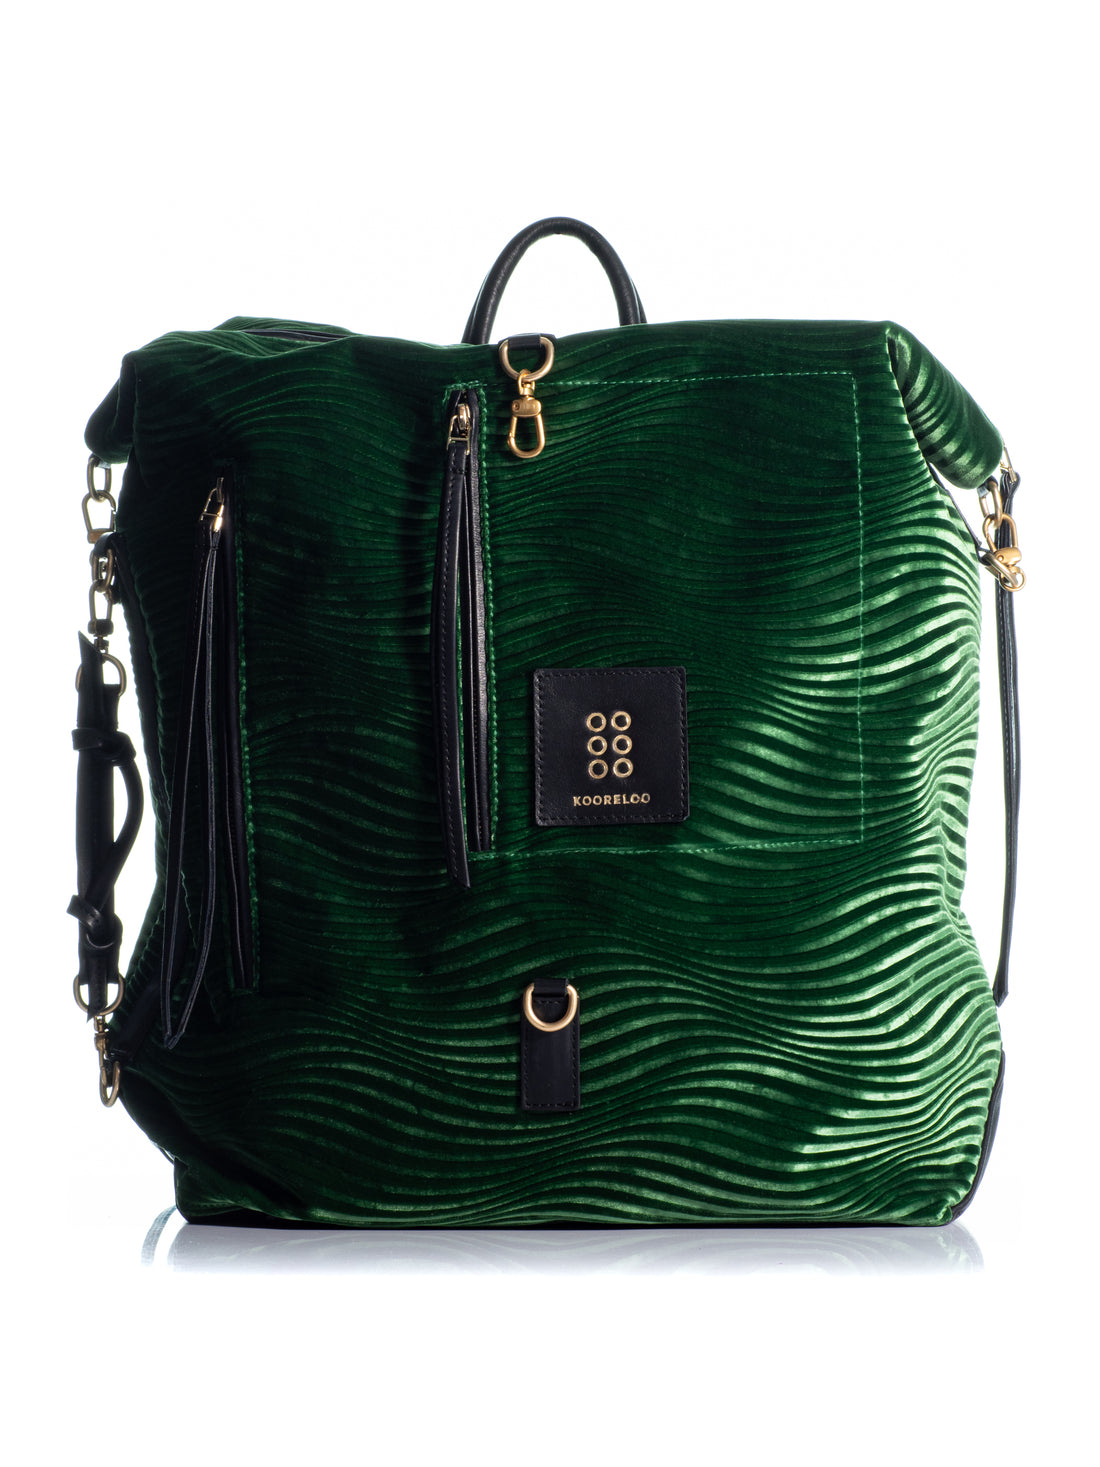 The Milano Backpack